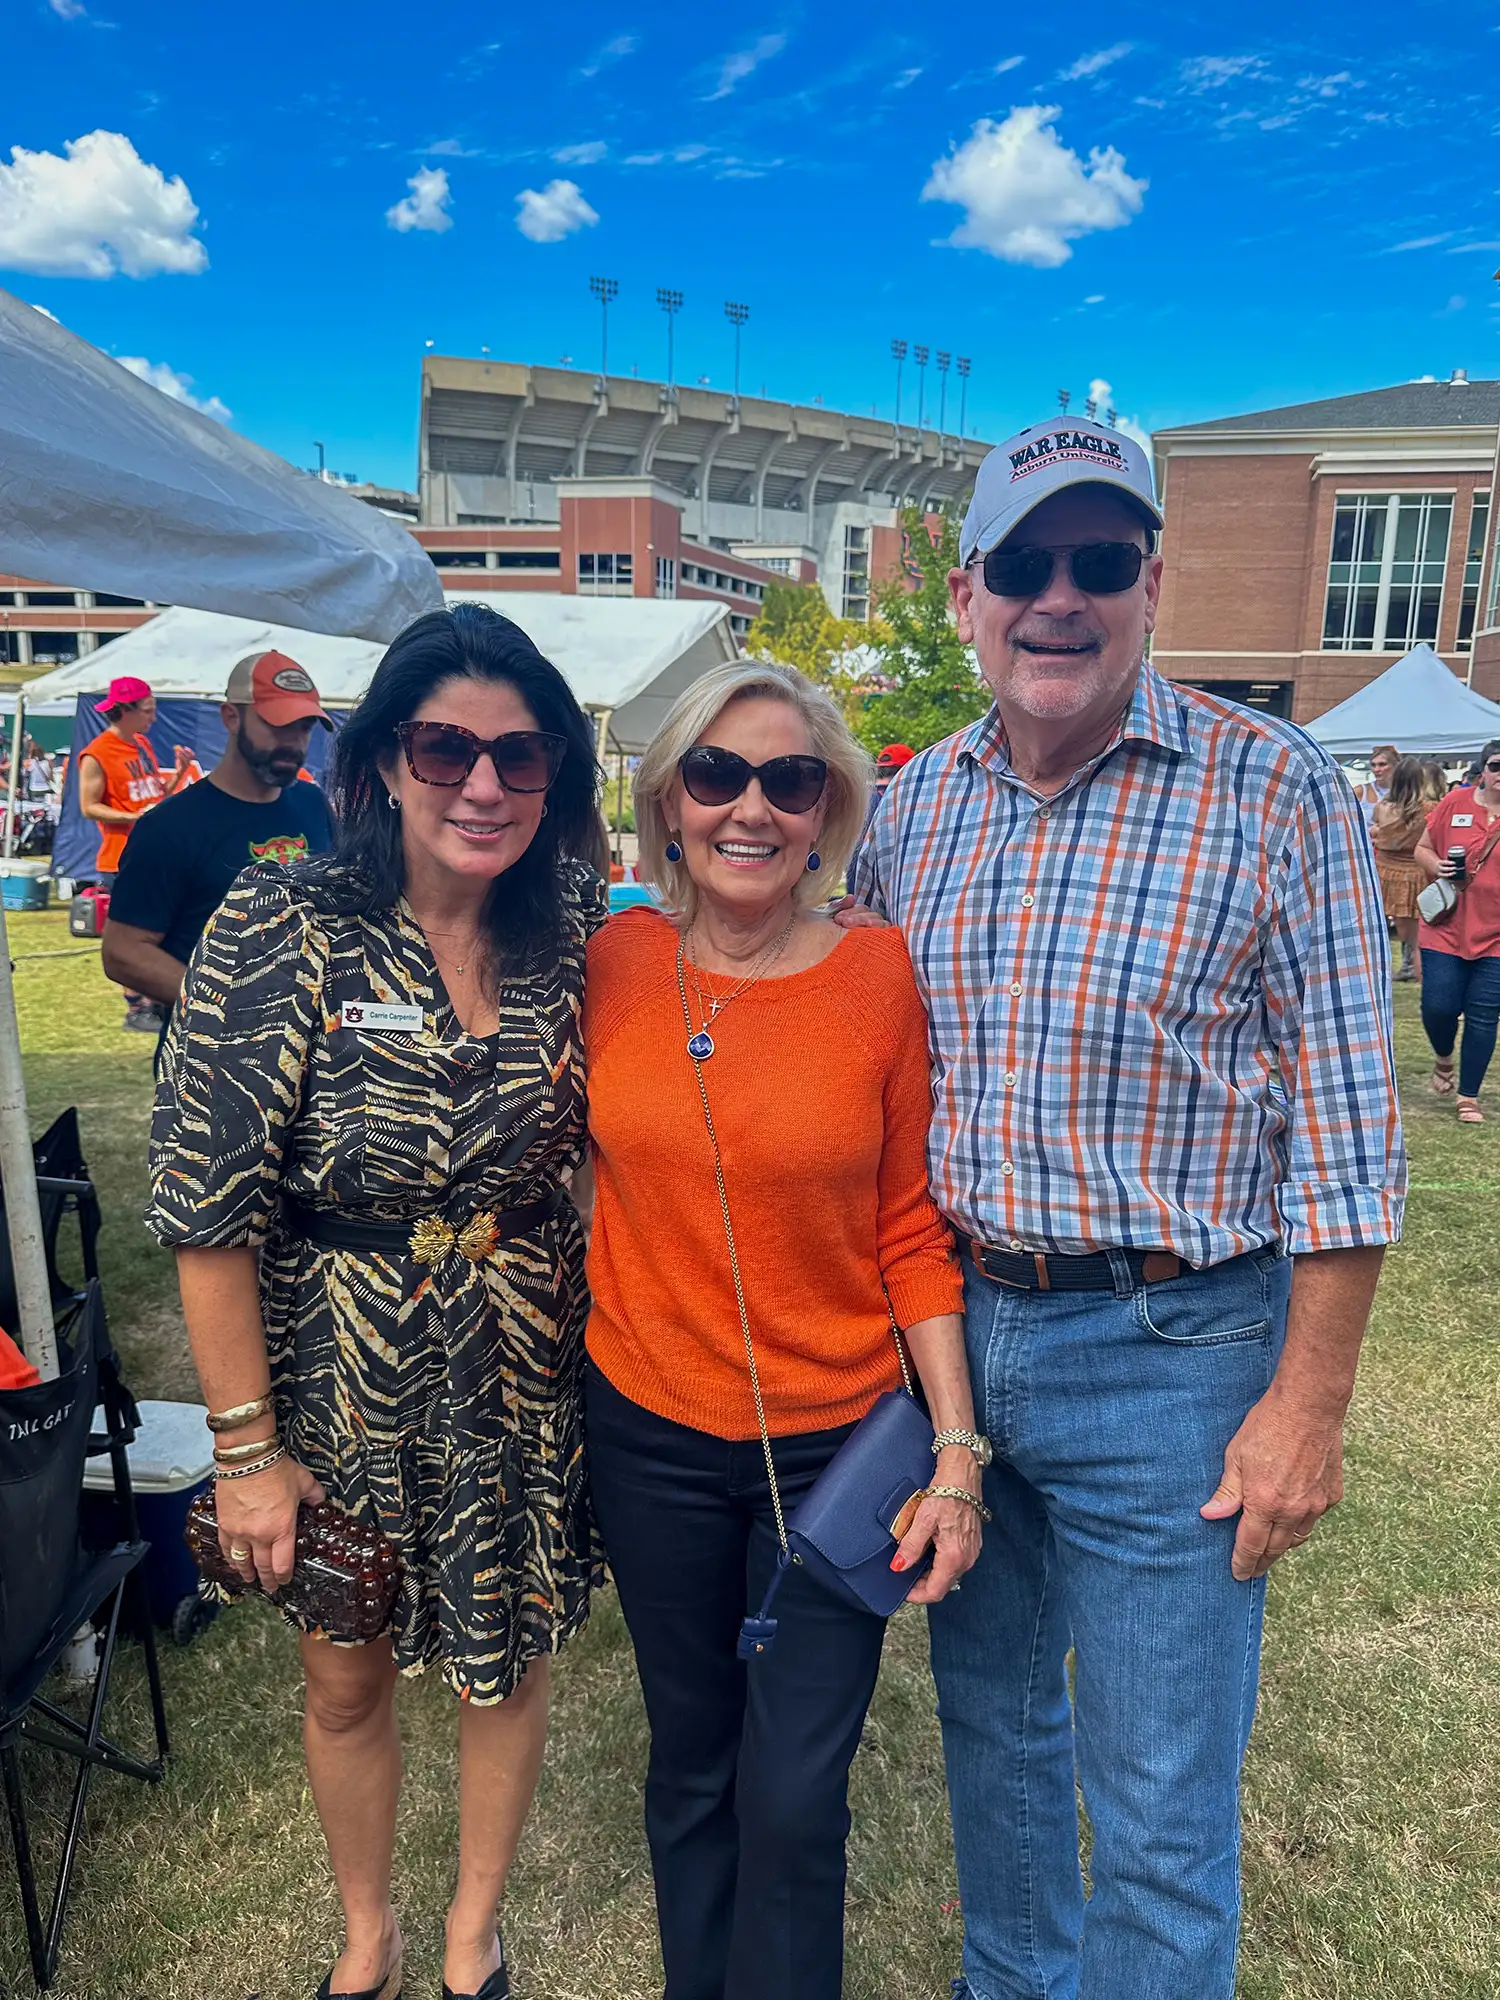 Carrie with alums at tailgate